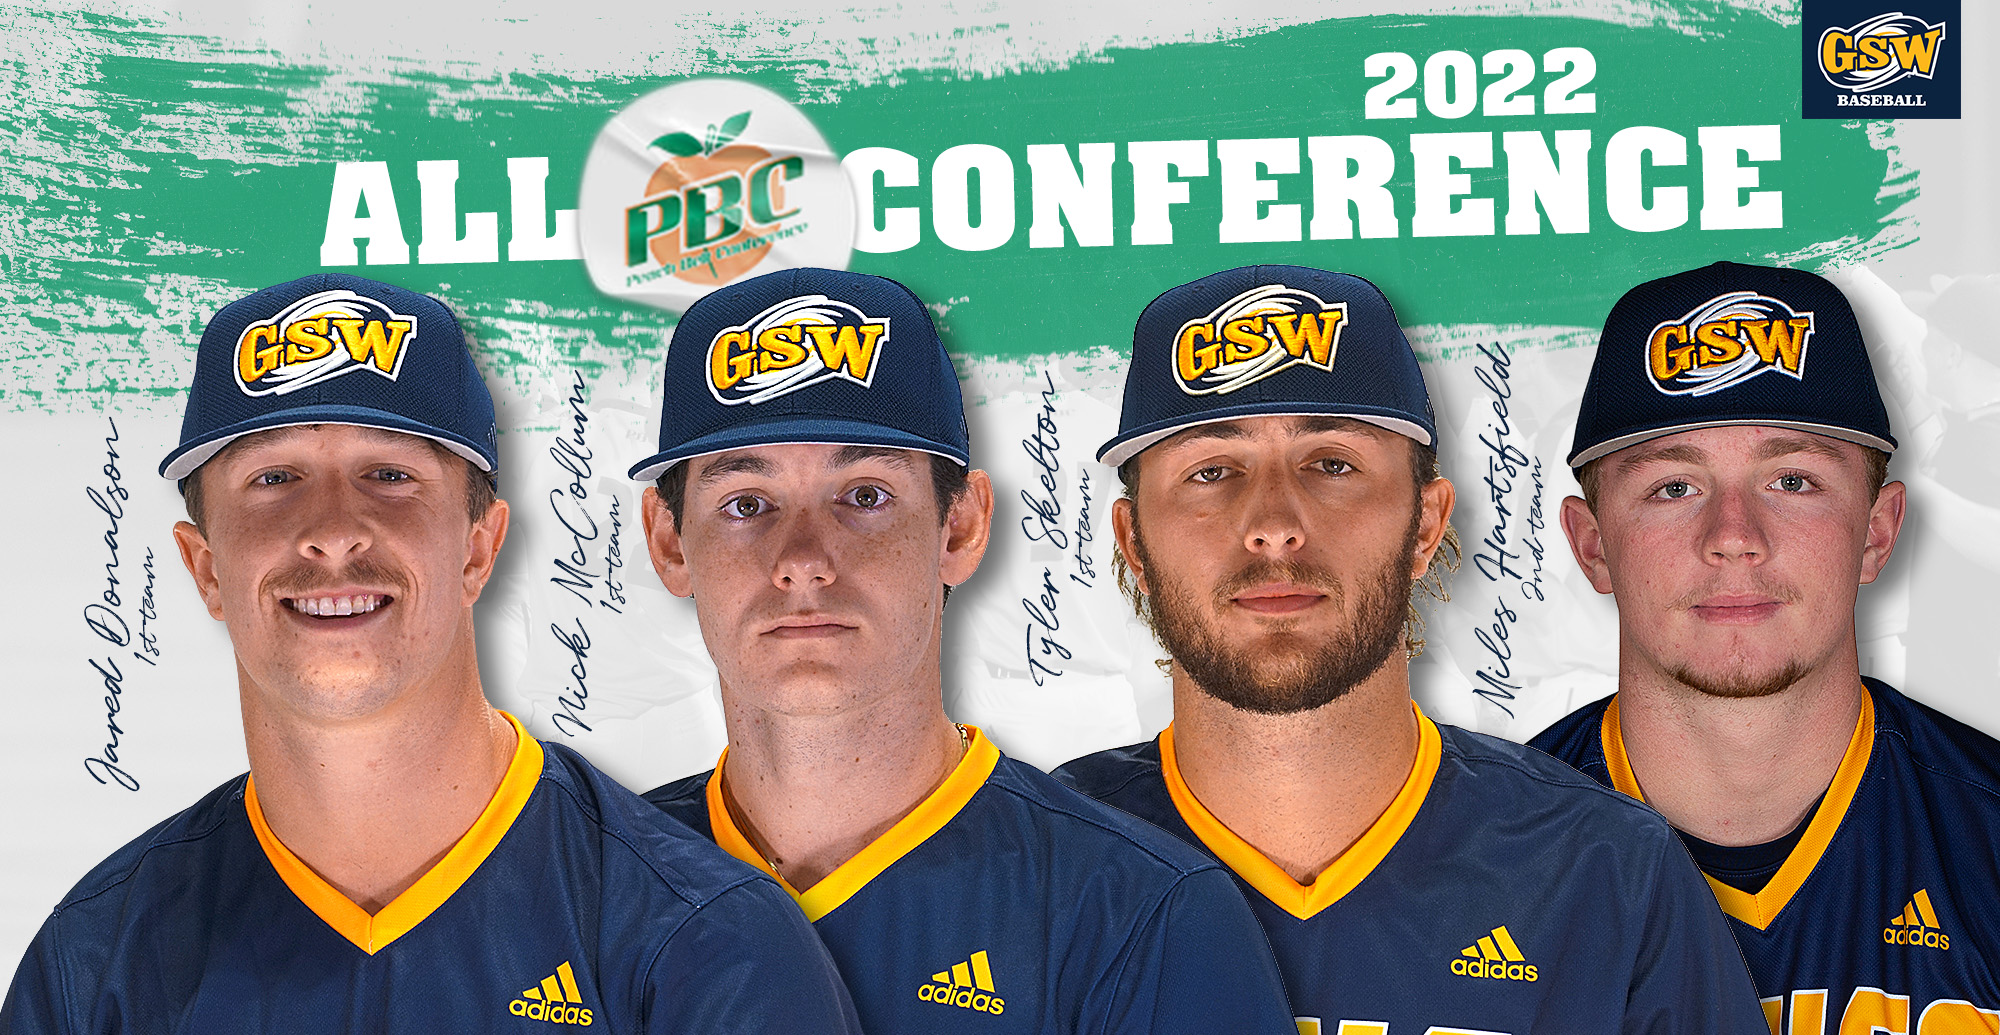 Hurricanes Get Four on PBC All-Conference Team